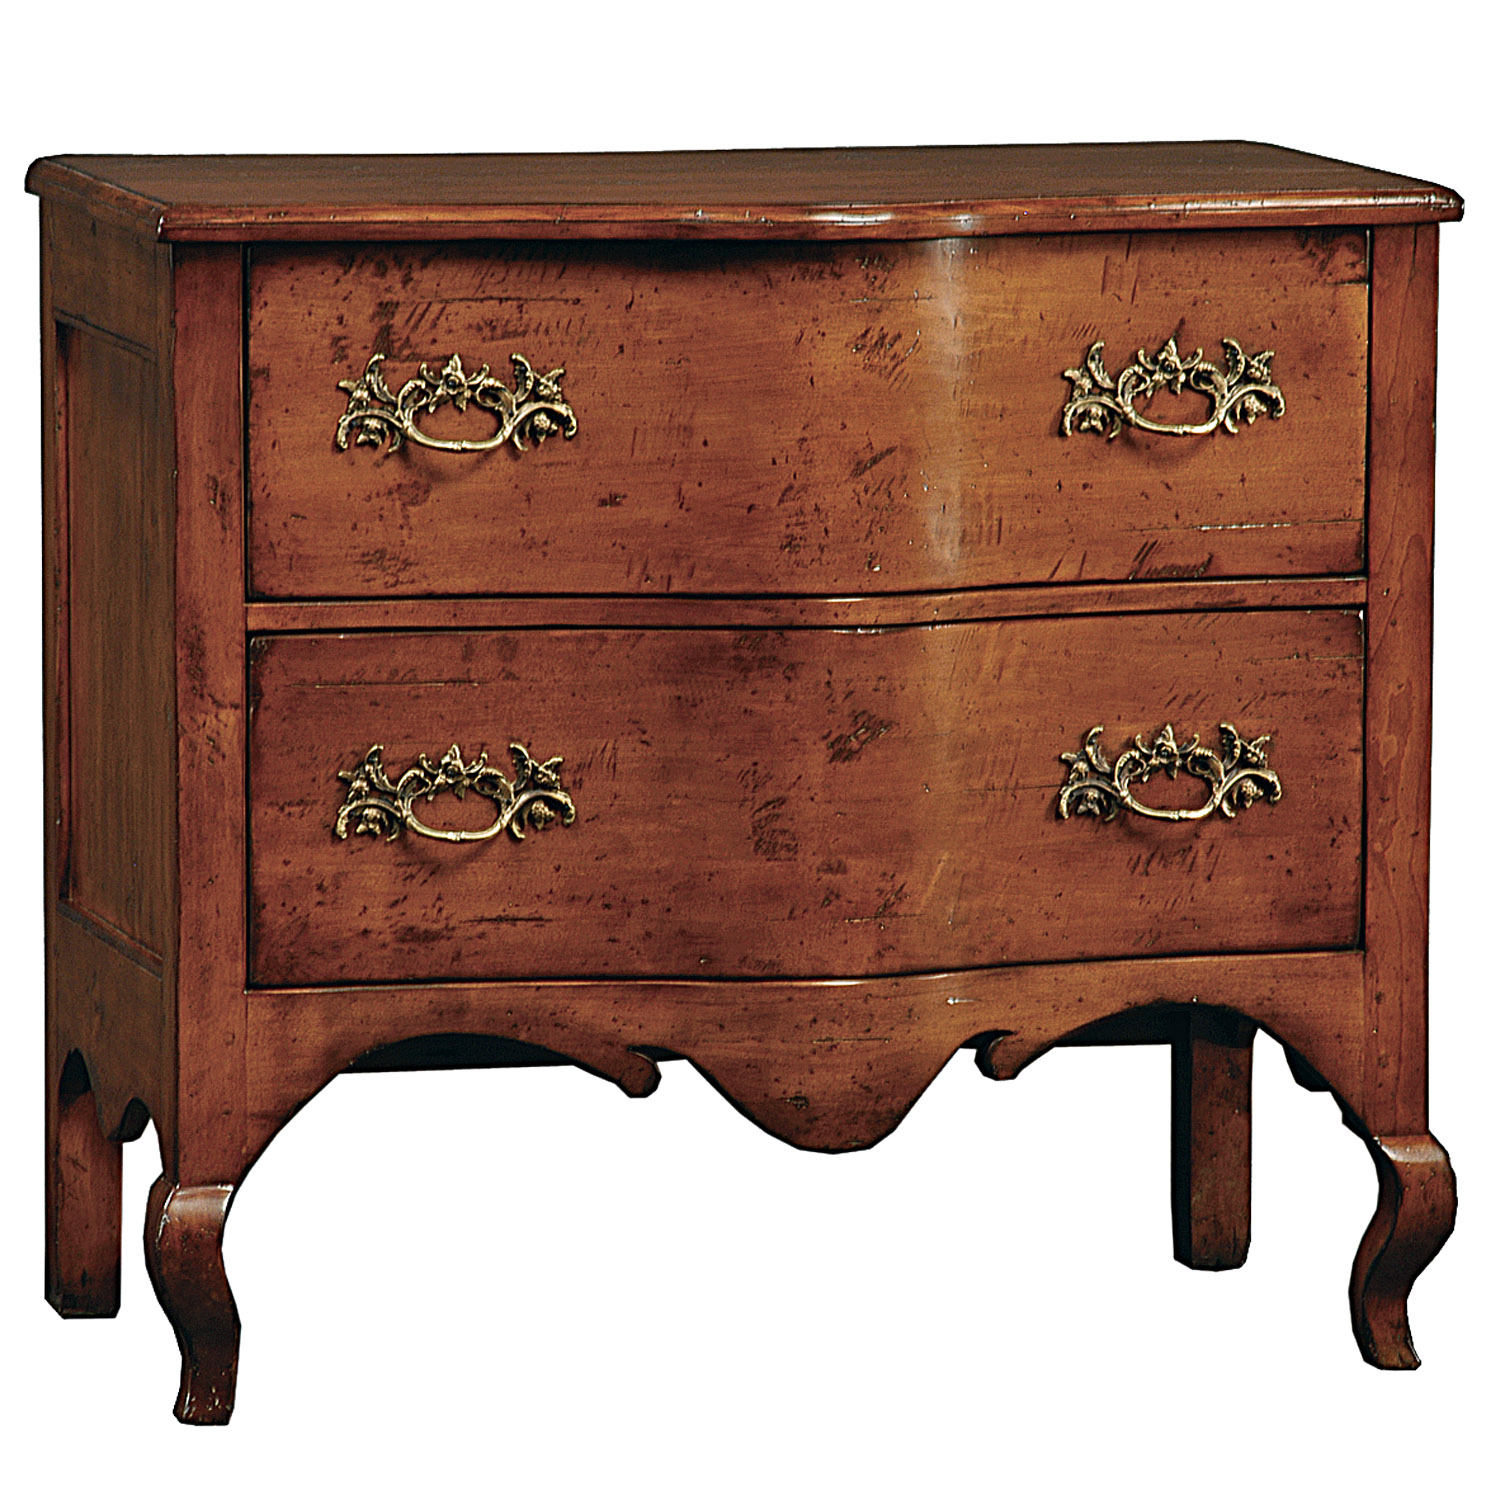 Brenelle antique traditional chest or drawers dresser on legs by Woodland furniture in Idaho Falls